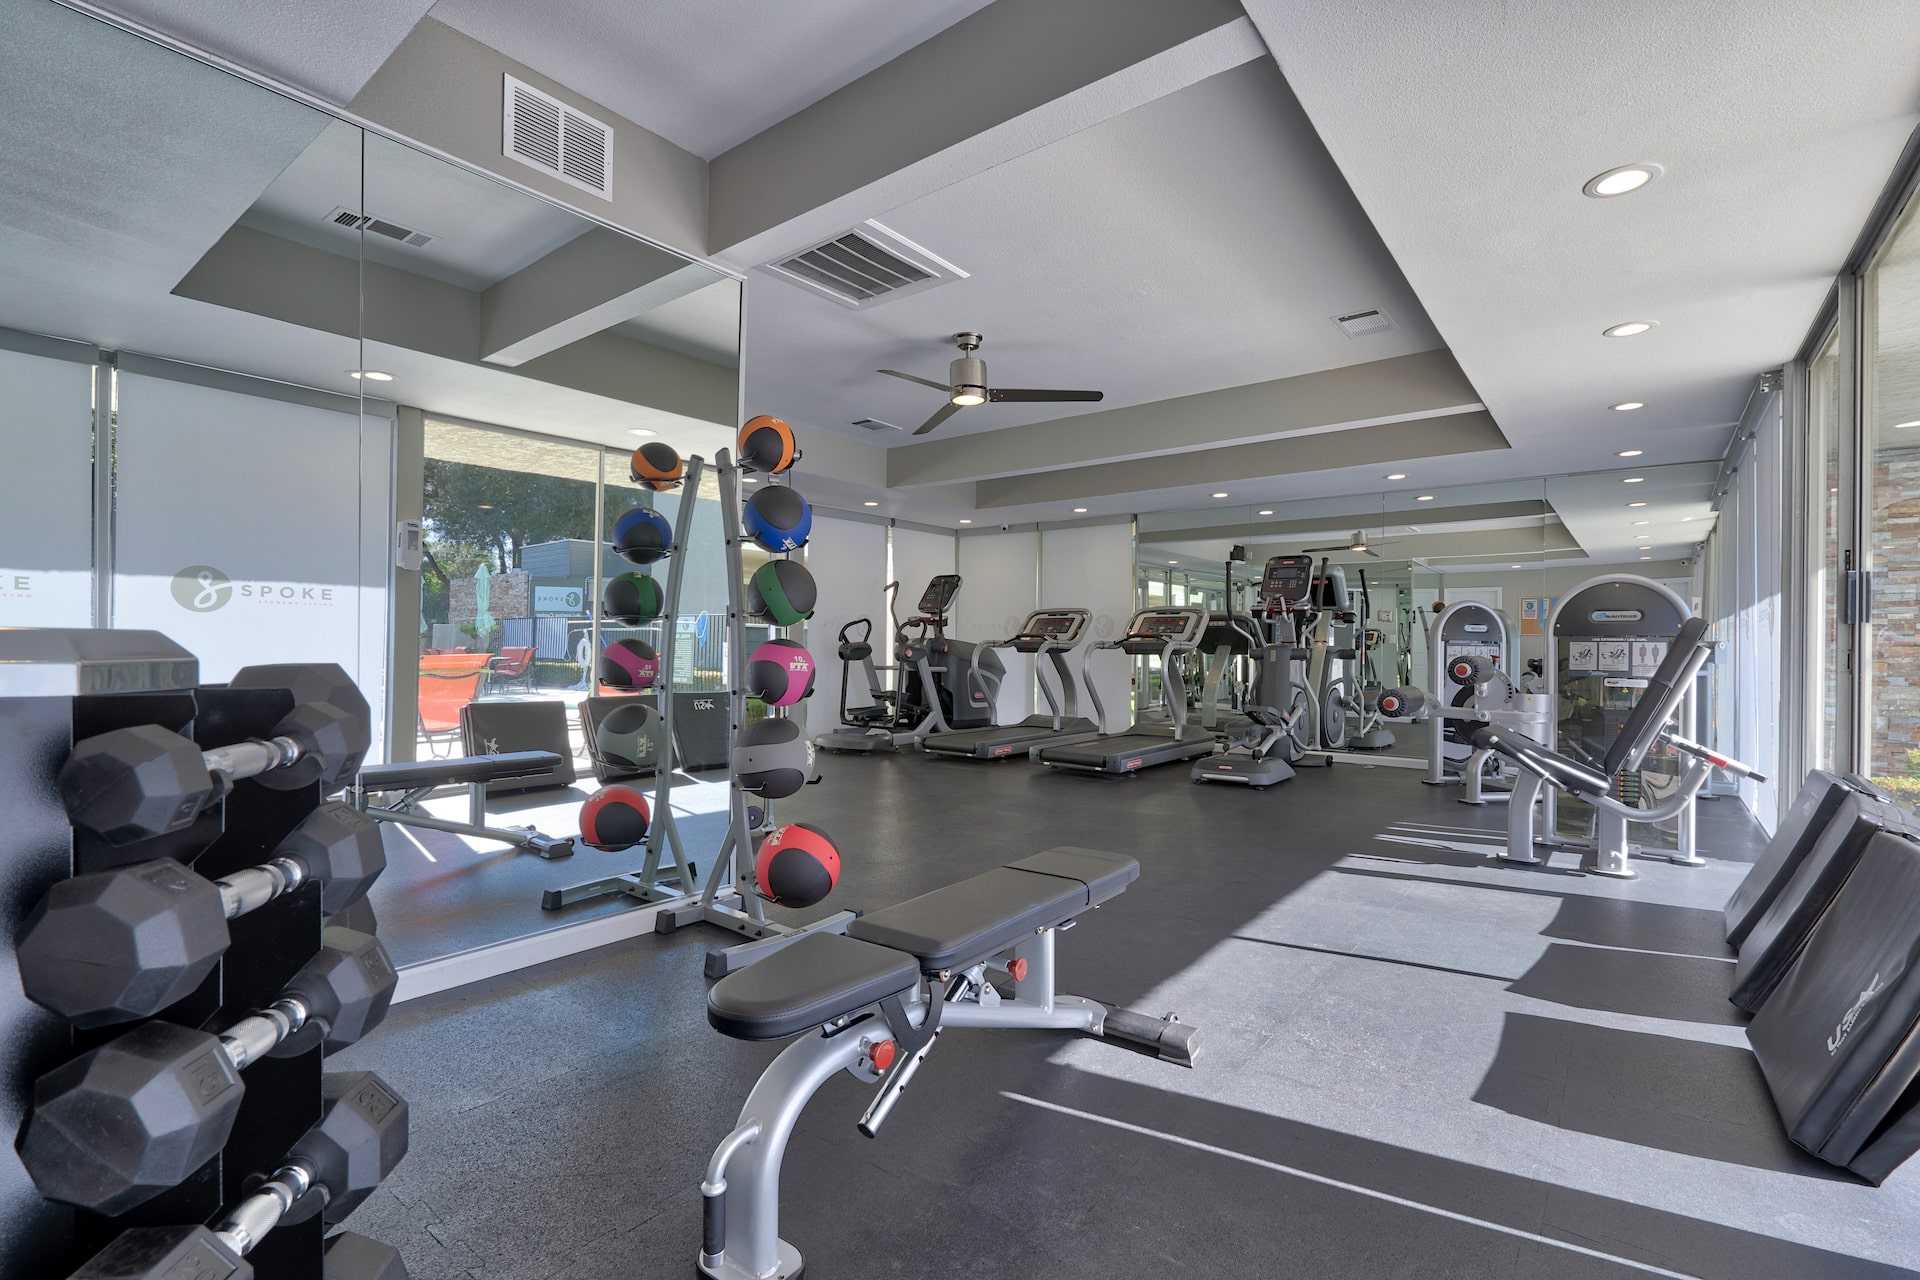 large fitness room with floor to ceiling windows, free weights, medicine balls, treadmills, and elliptical machines.